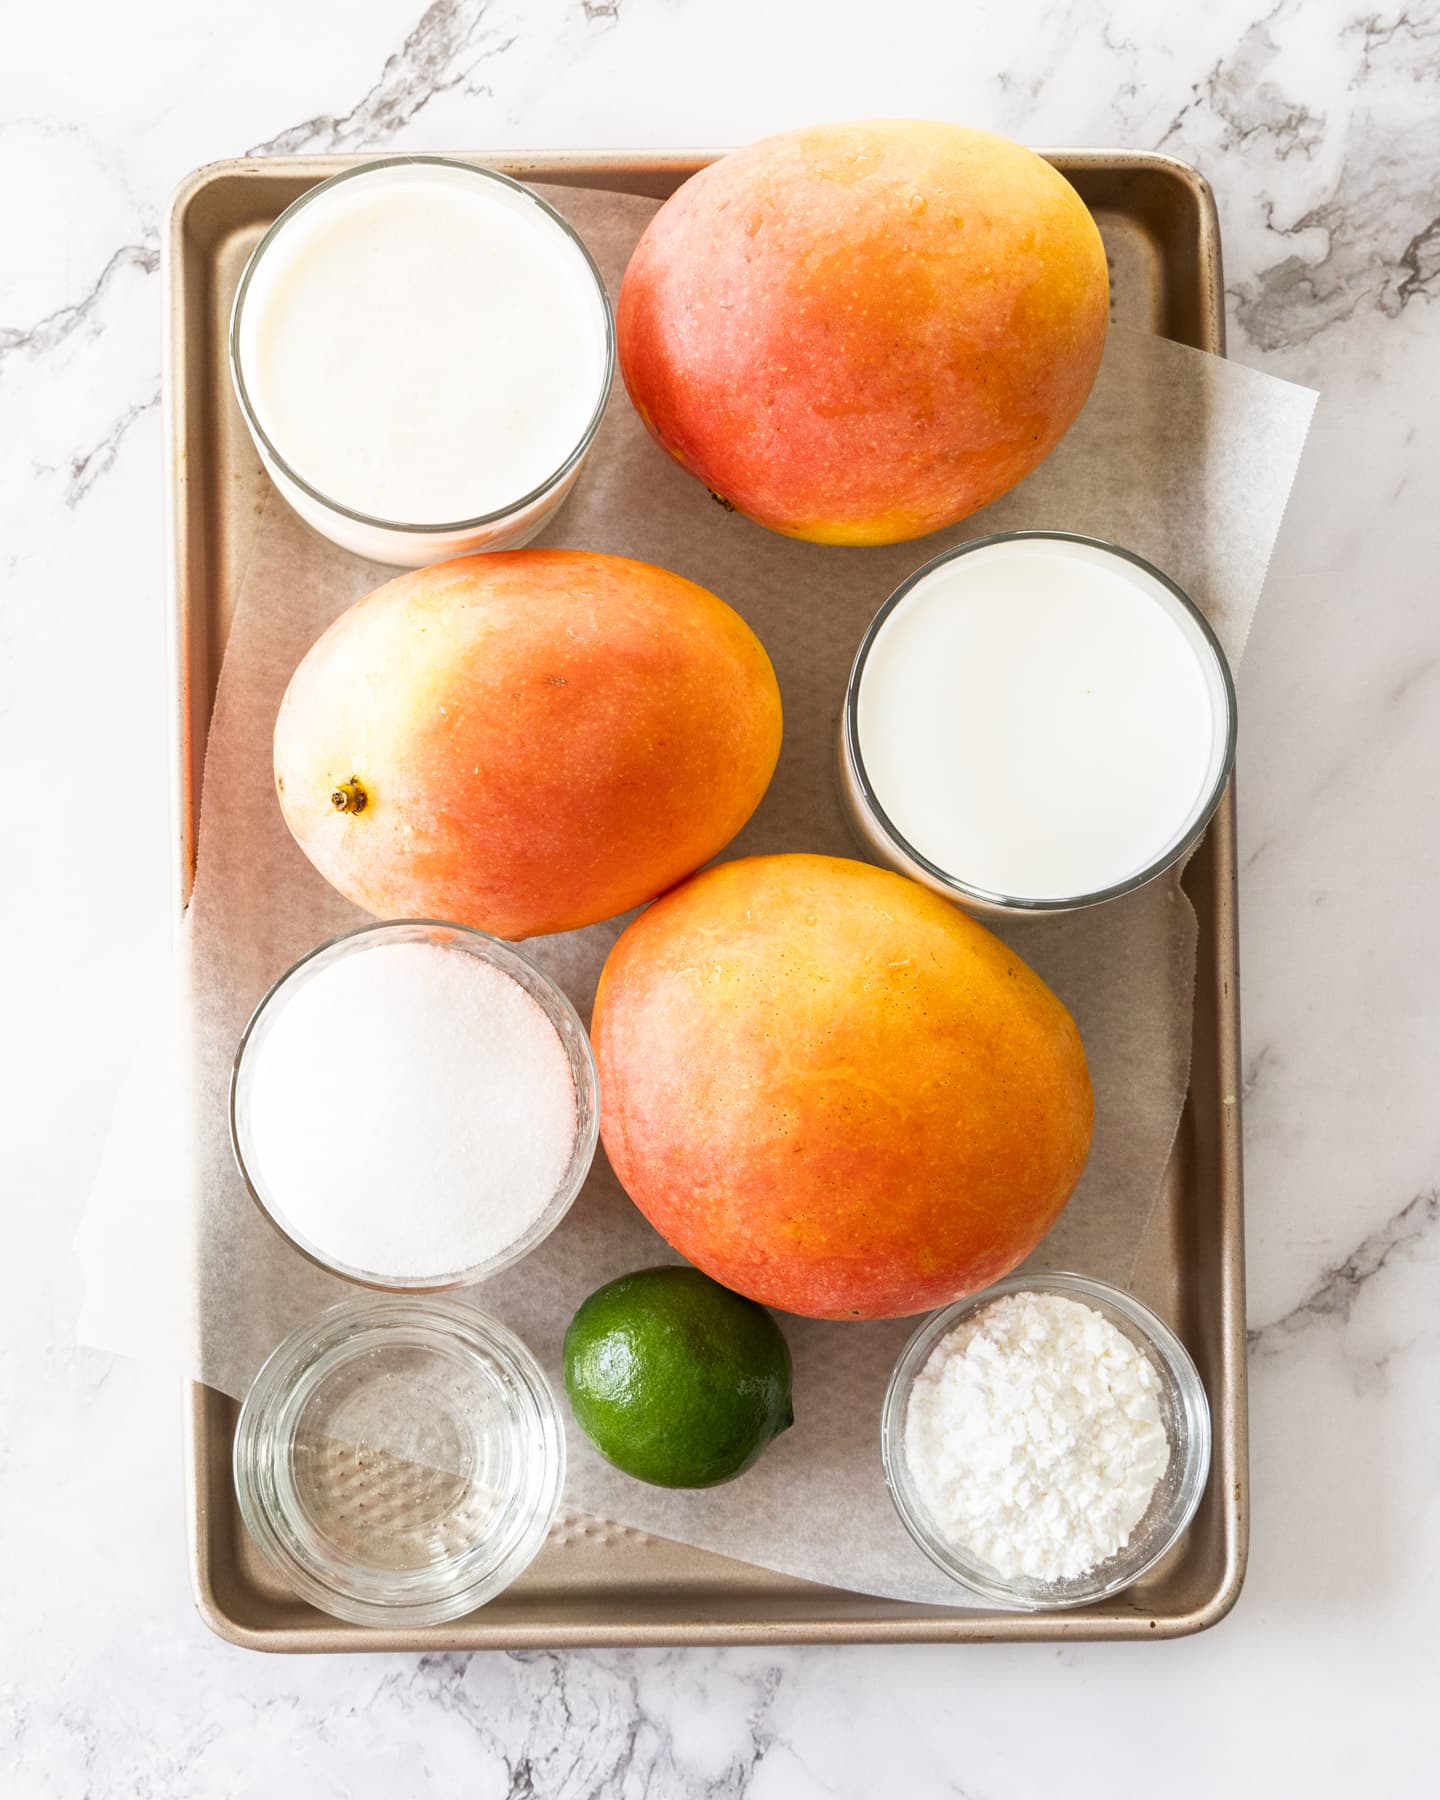 Ingredients for mango gelato on a baking tray.